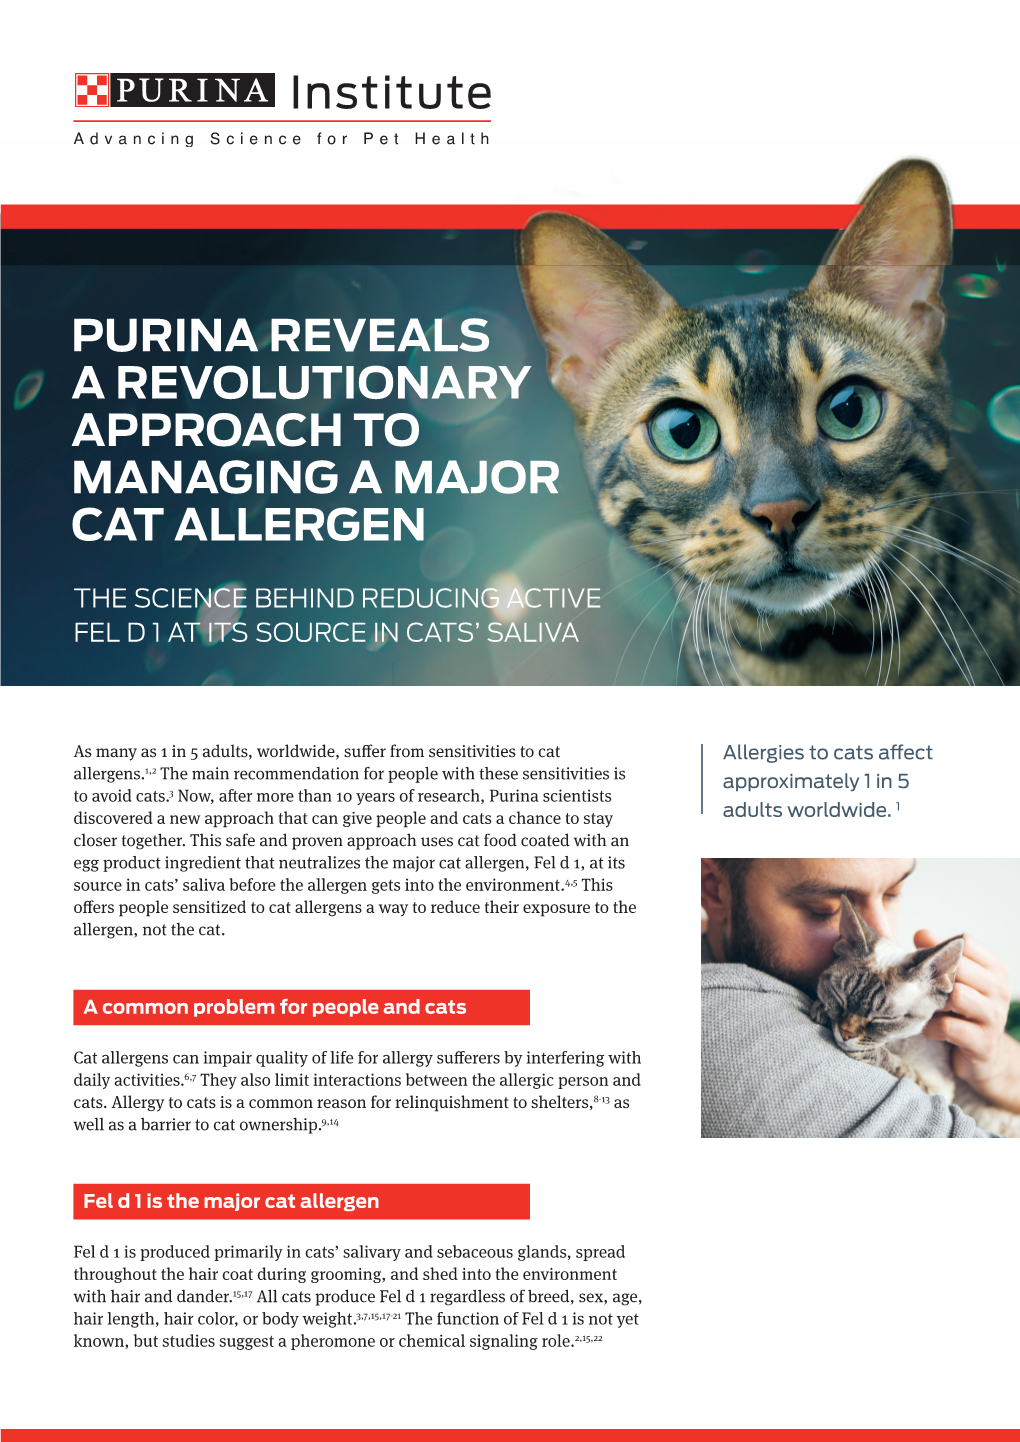 Purina Reveals a Revolutionary Approach to Managing a Major Cat Allergen